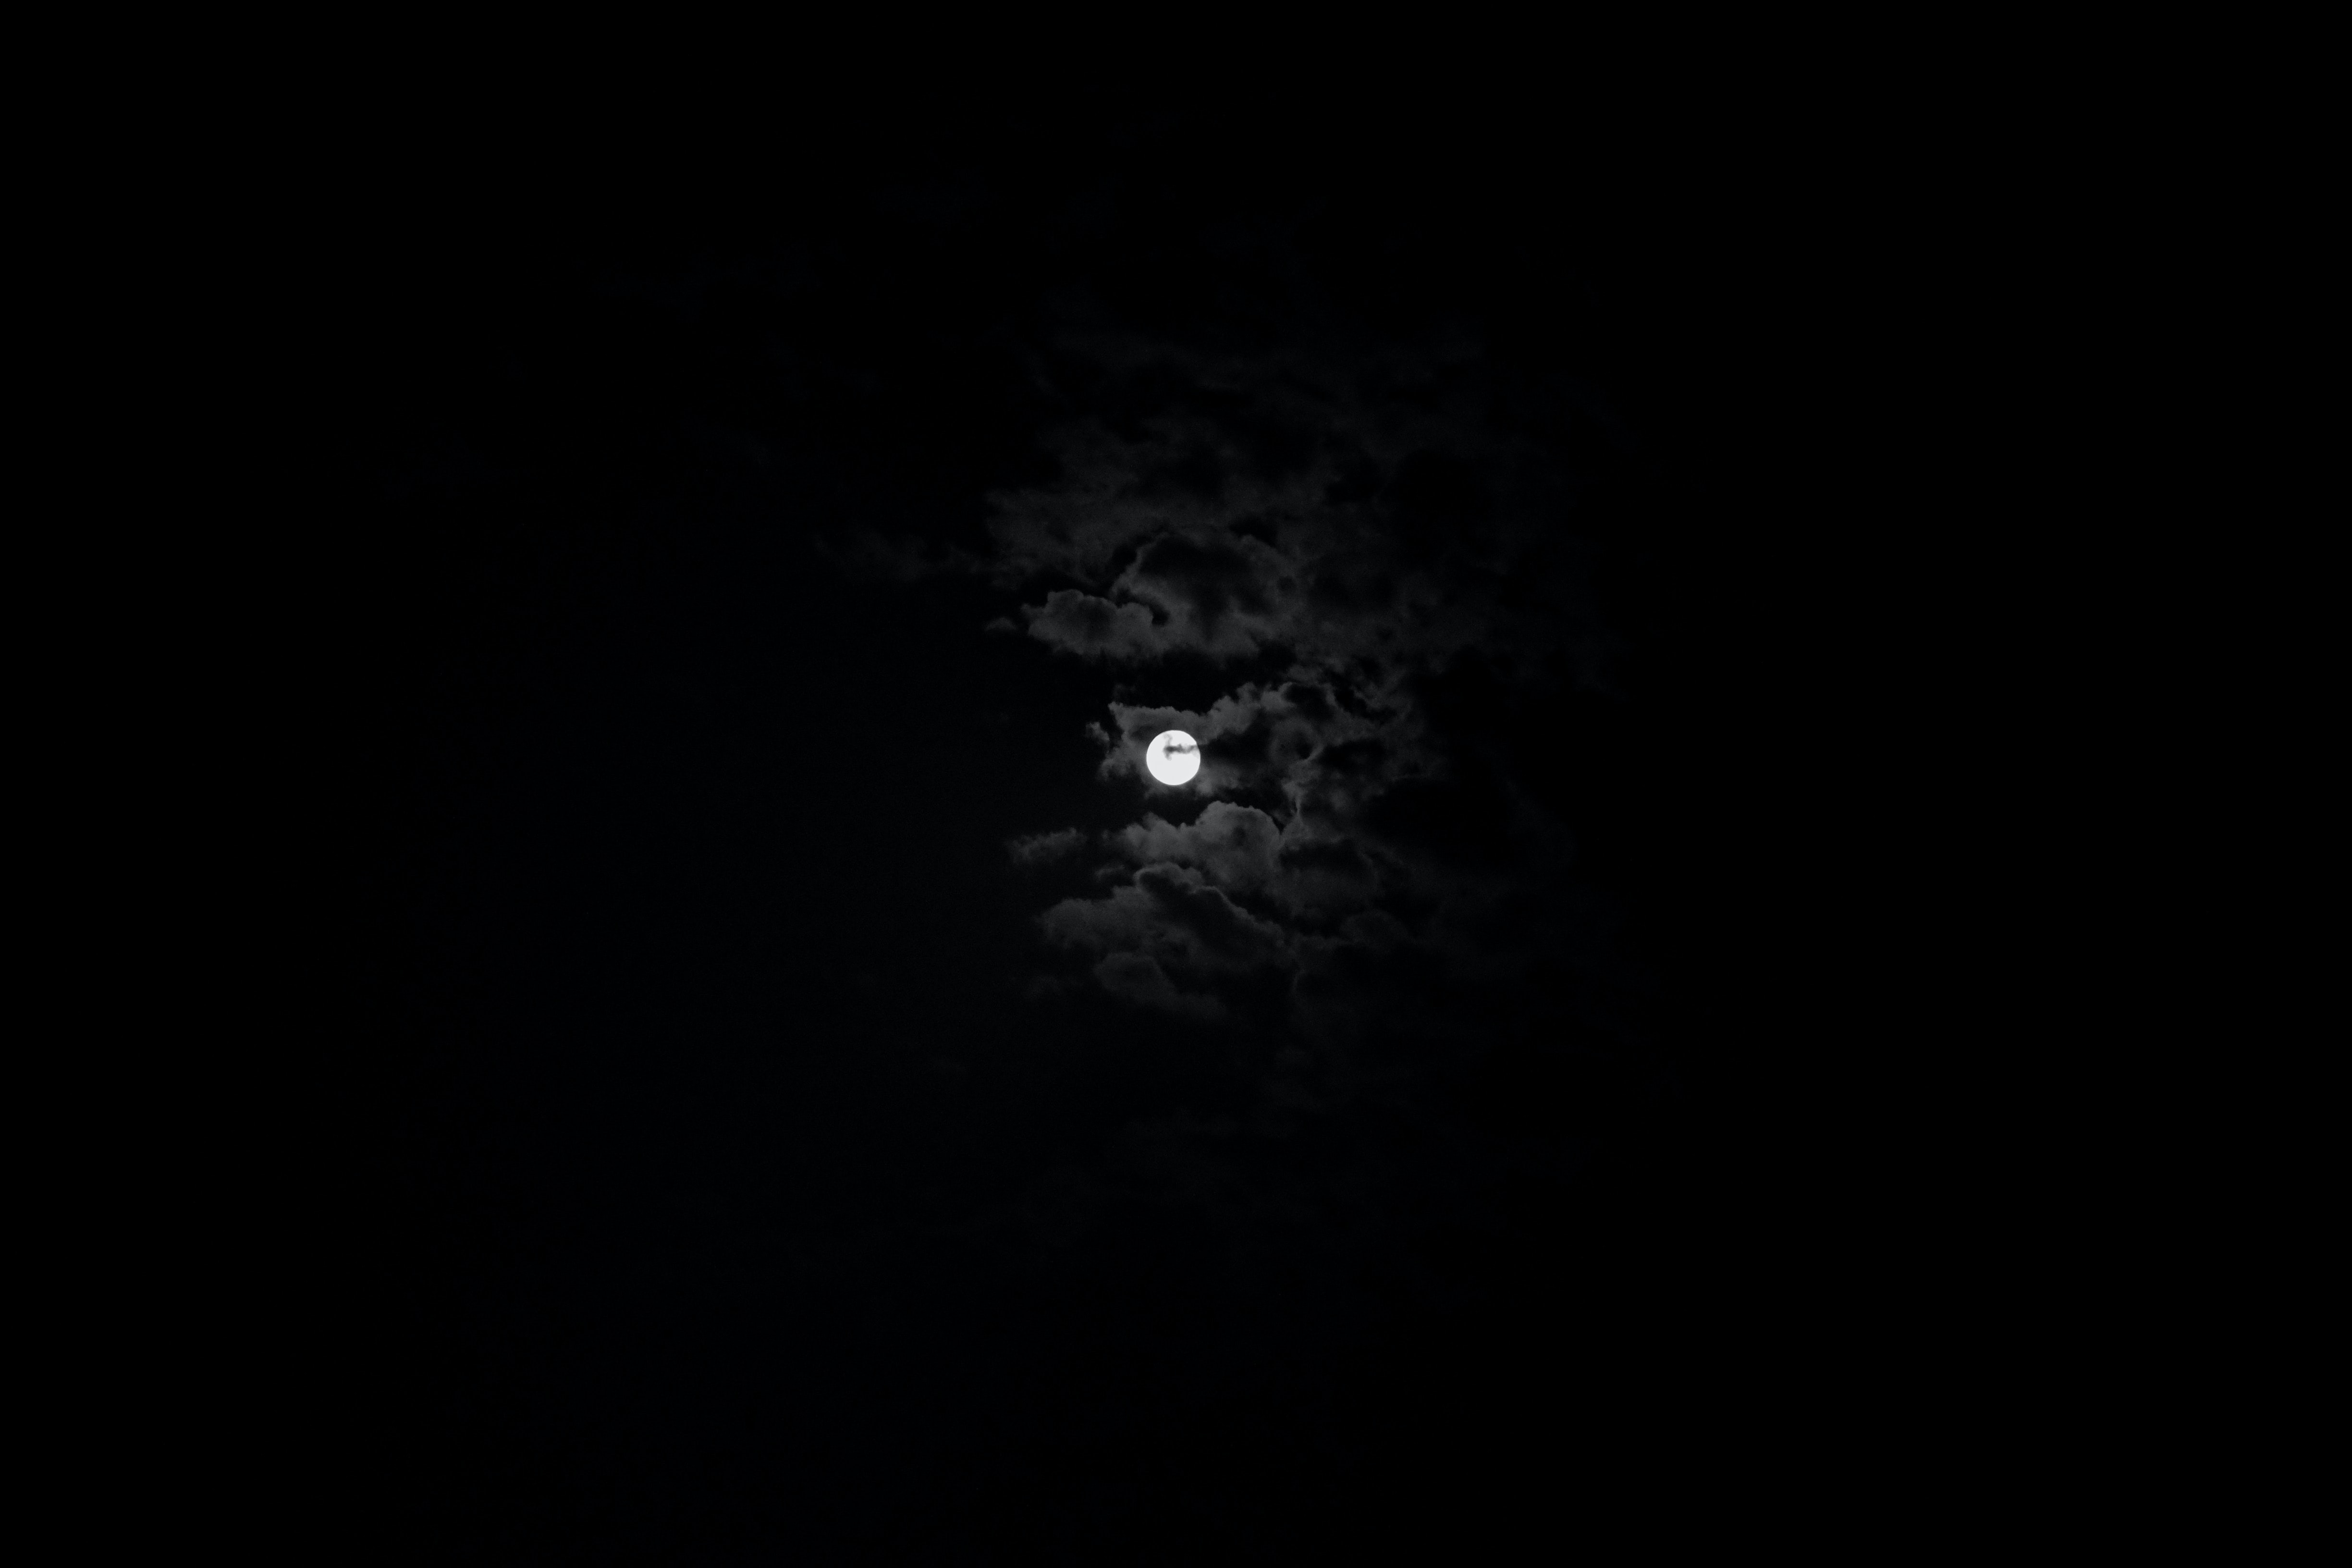 moon, black, black and white, sky, night, clouds